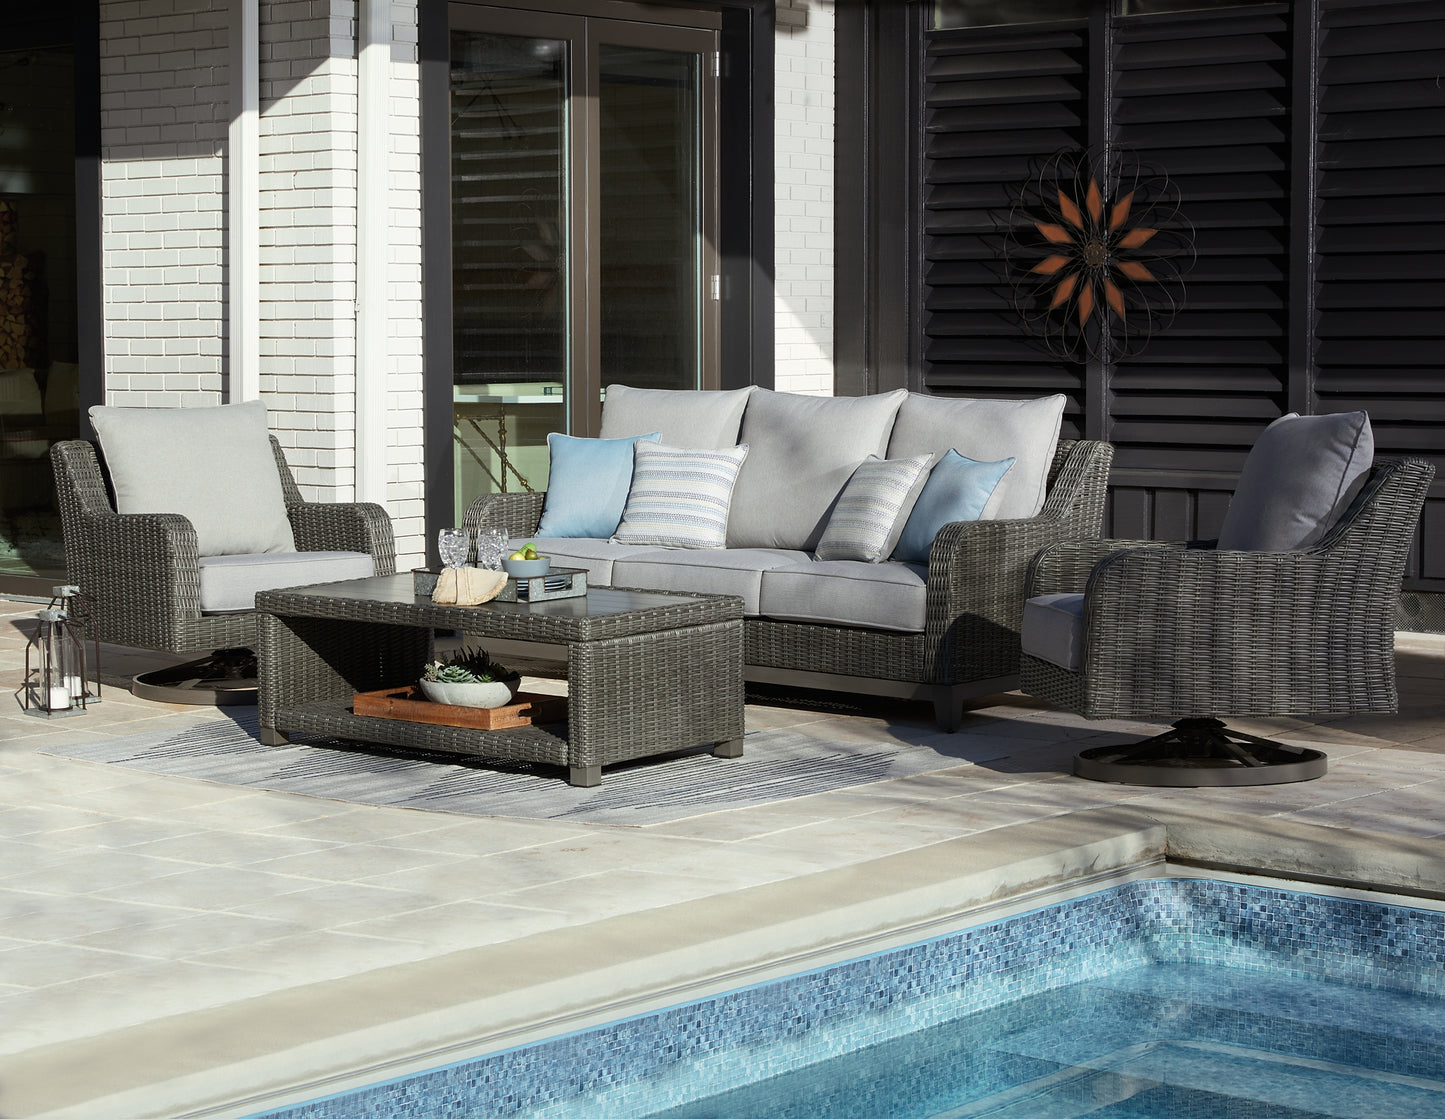 Elite Park Outdoor Sofa and 2 Chairs with Coffee Table Wilson Furniture (OH)  in Bridgeport, Ohio. Serving Bridgeport, Yorkville, Bellaire, & Avondale